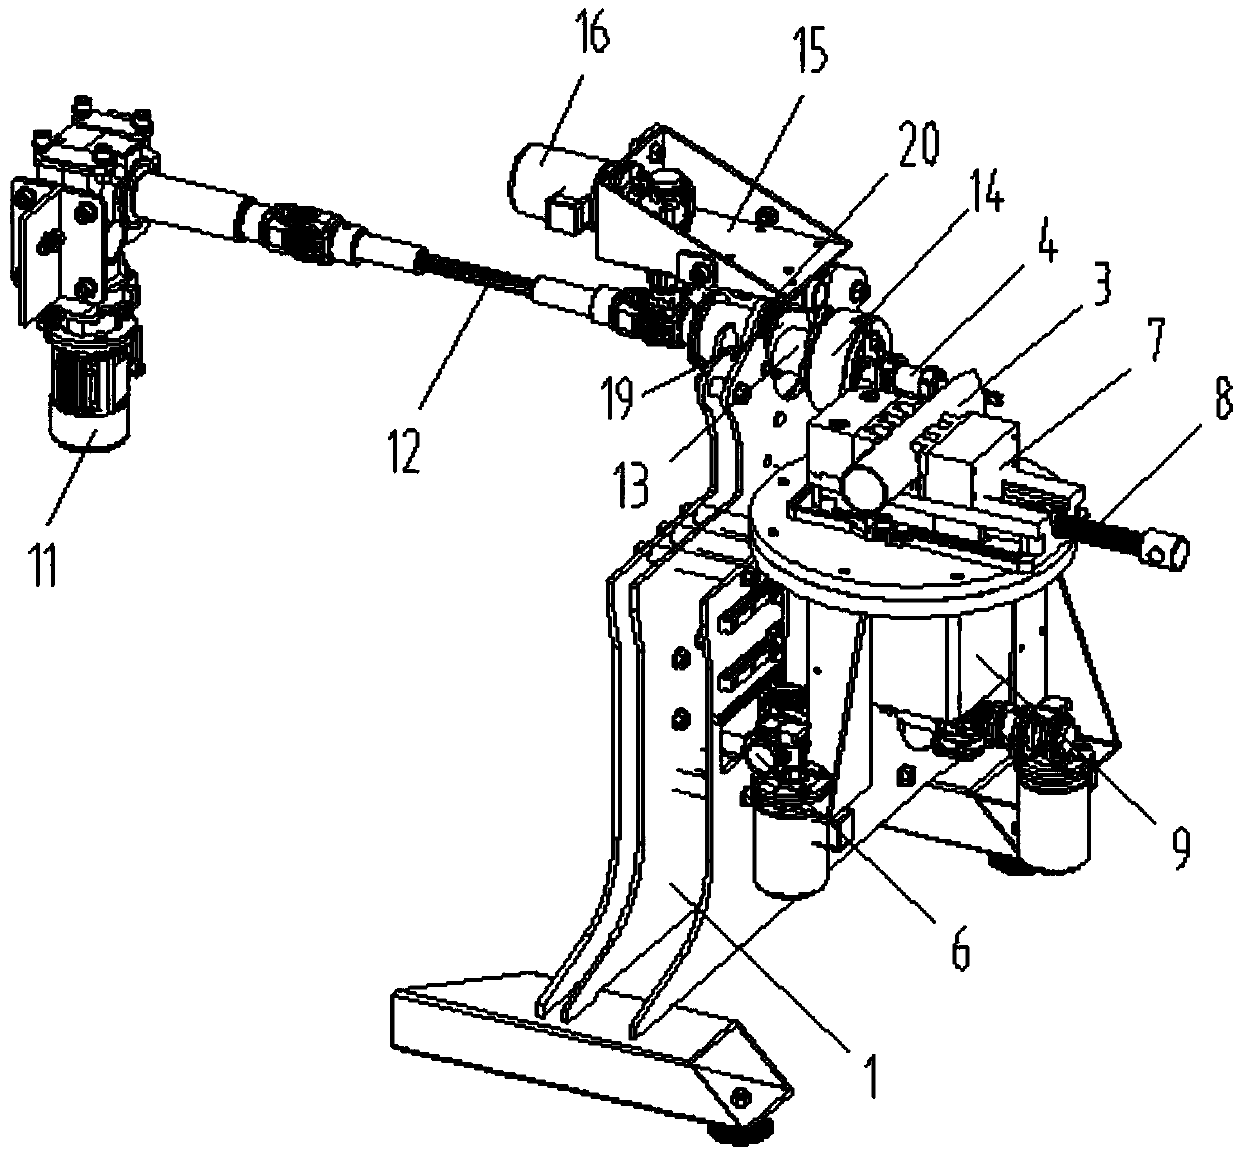 A multifunctional lathe with tool rotation